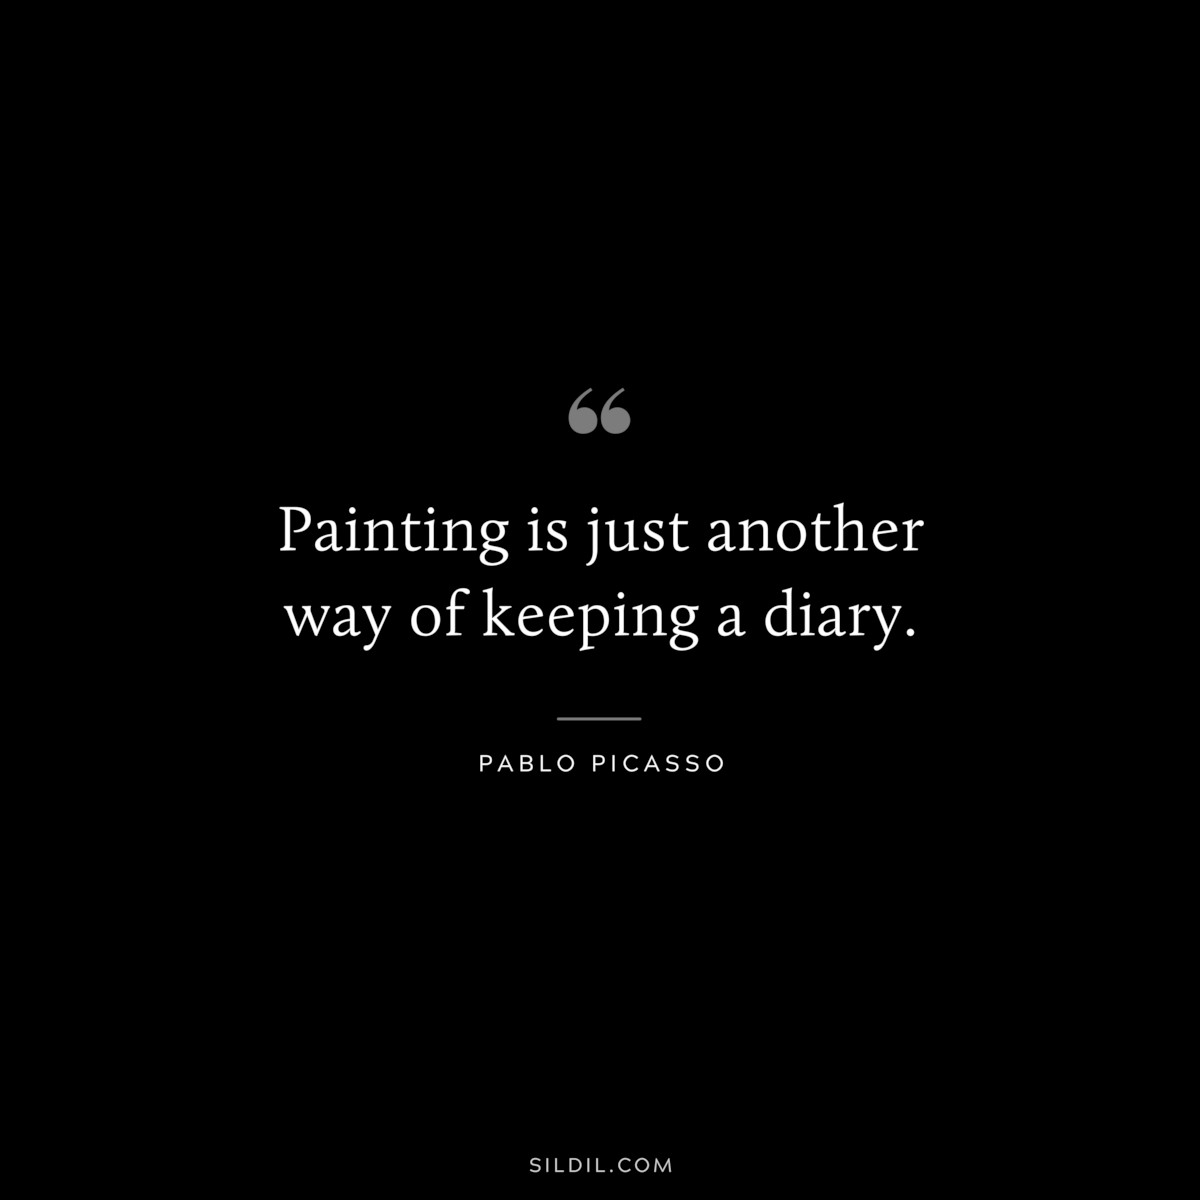 Painting is just another way of keeping a diary. ― Pablo Picasso